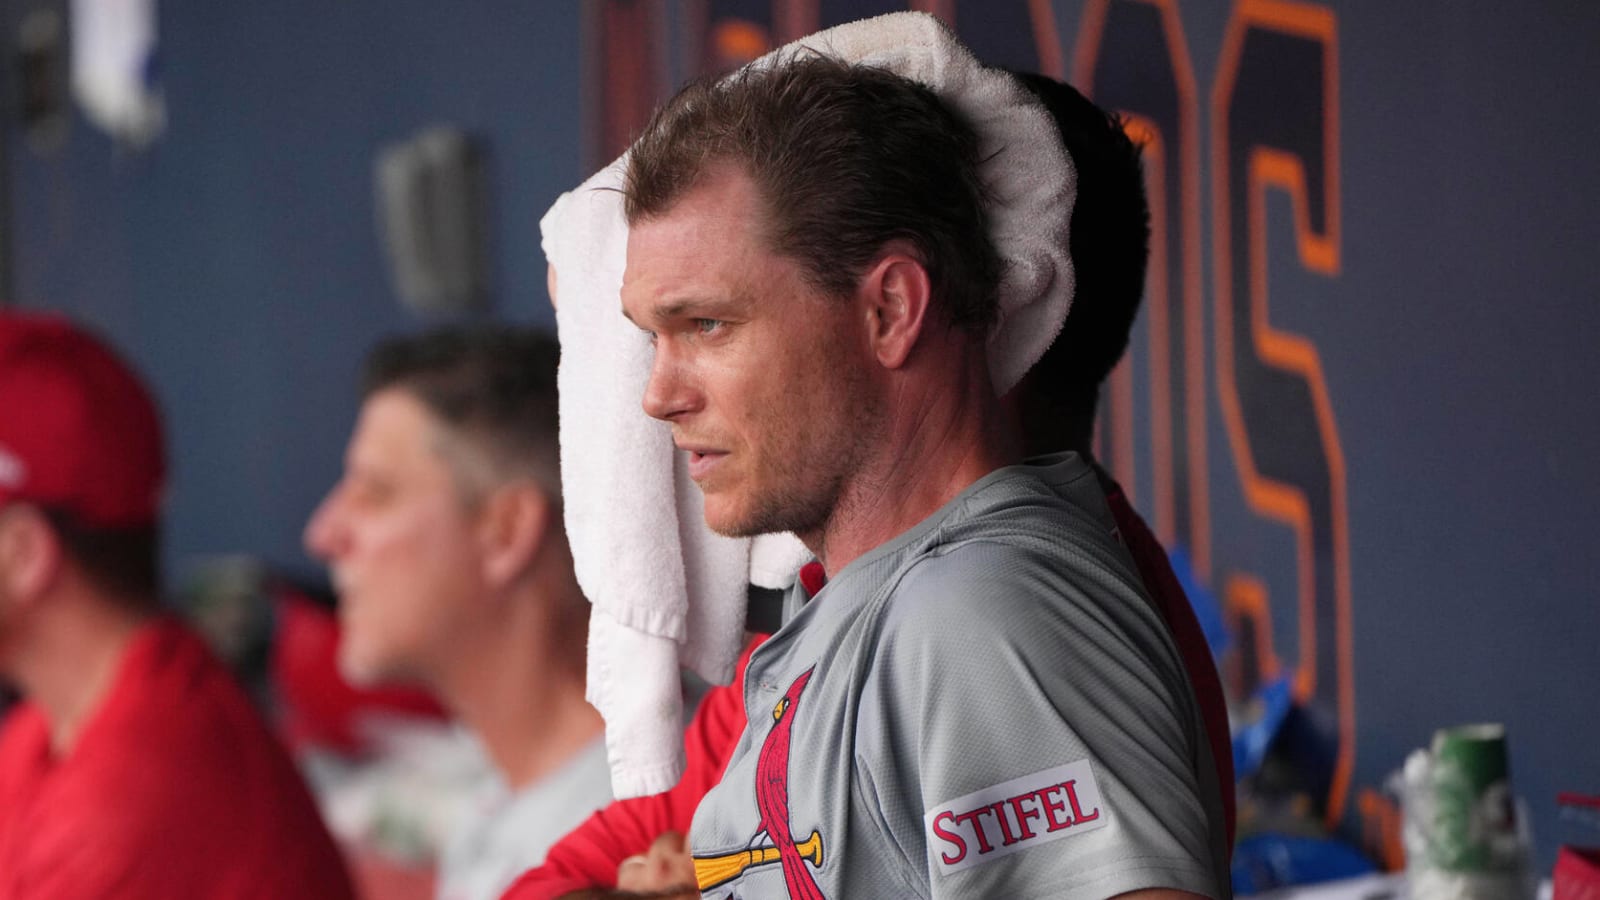 Cardinals facing injury attrition in rotation and outfield